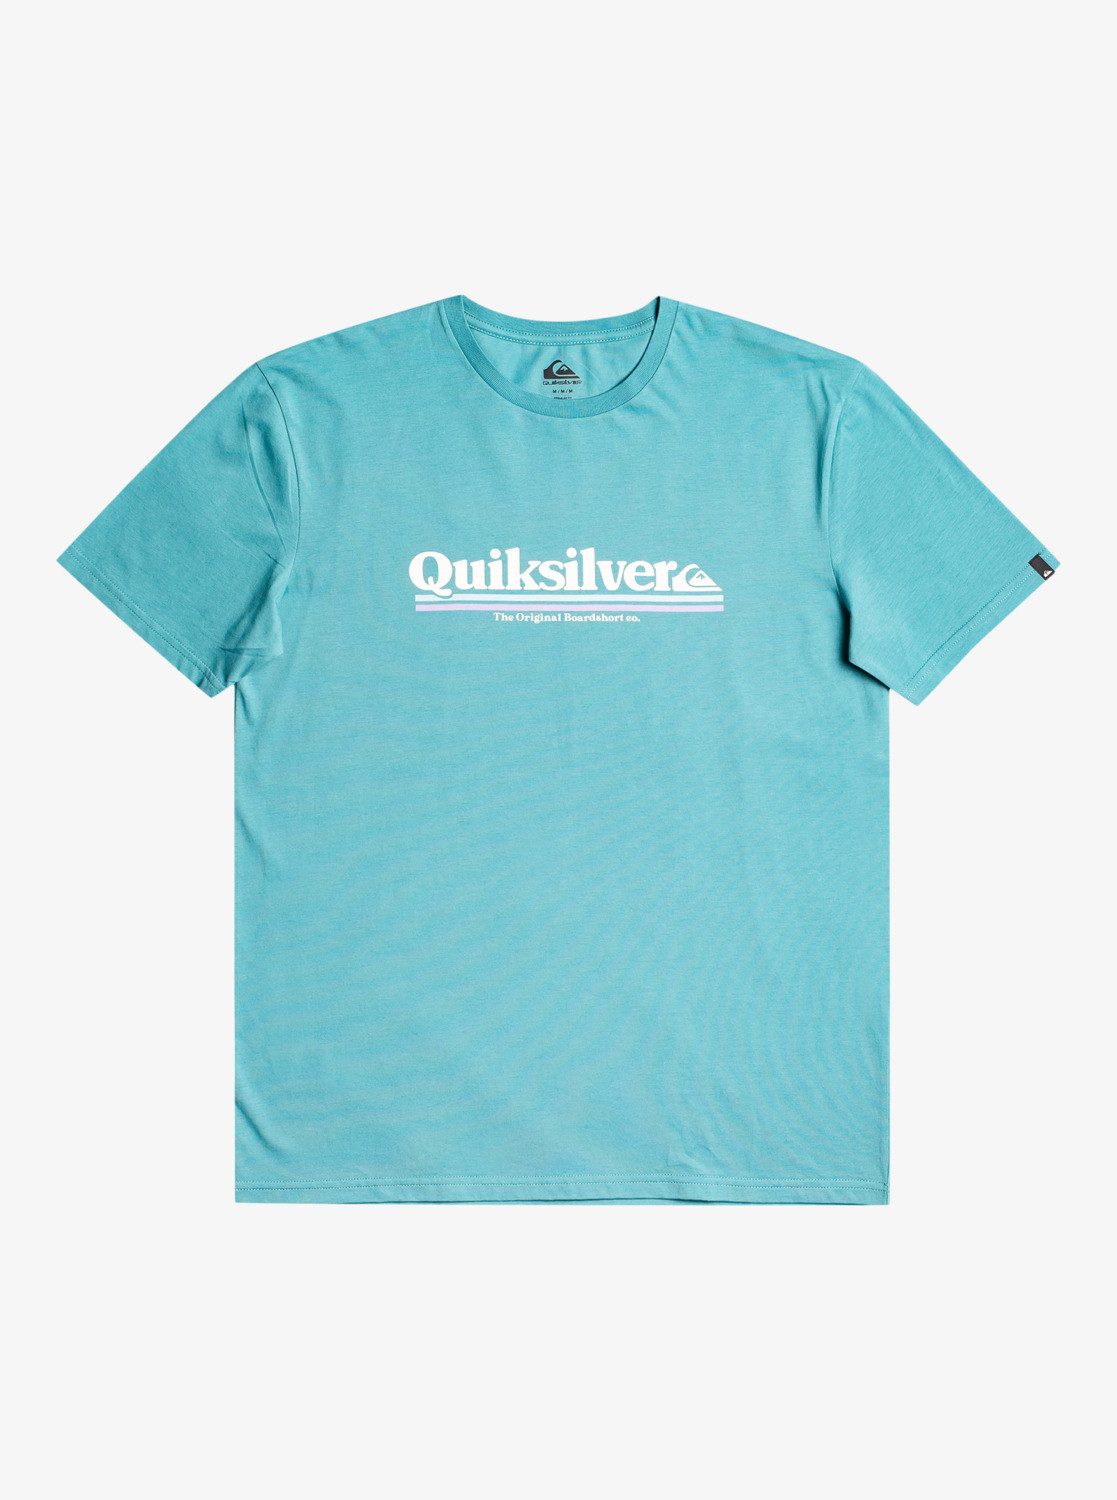 T-Shirt Lines Brittany Quiksilver The Blue Between